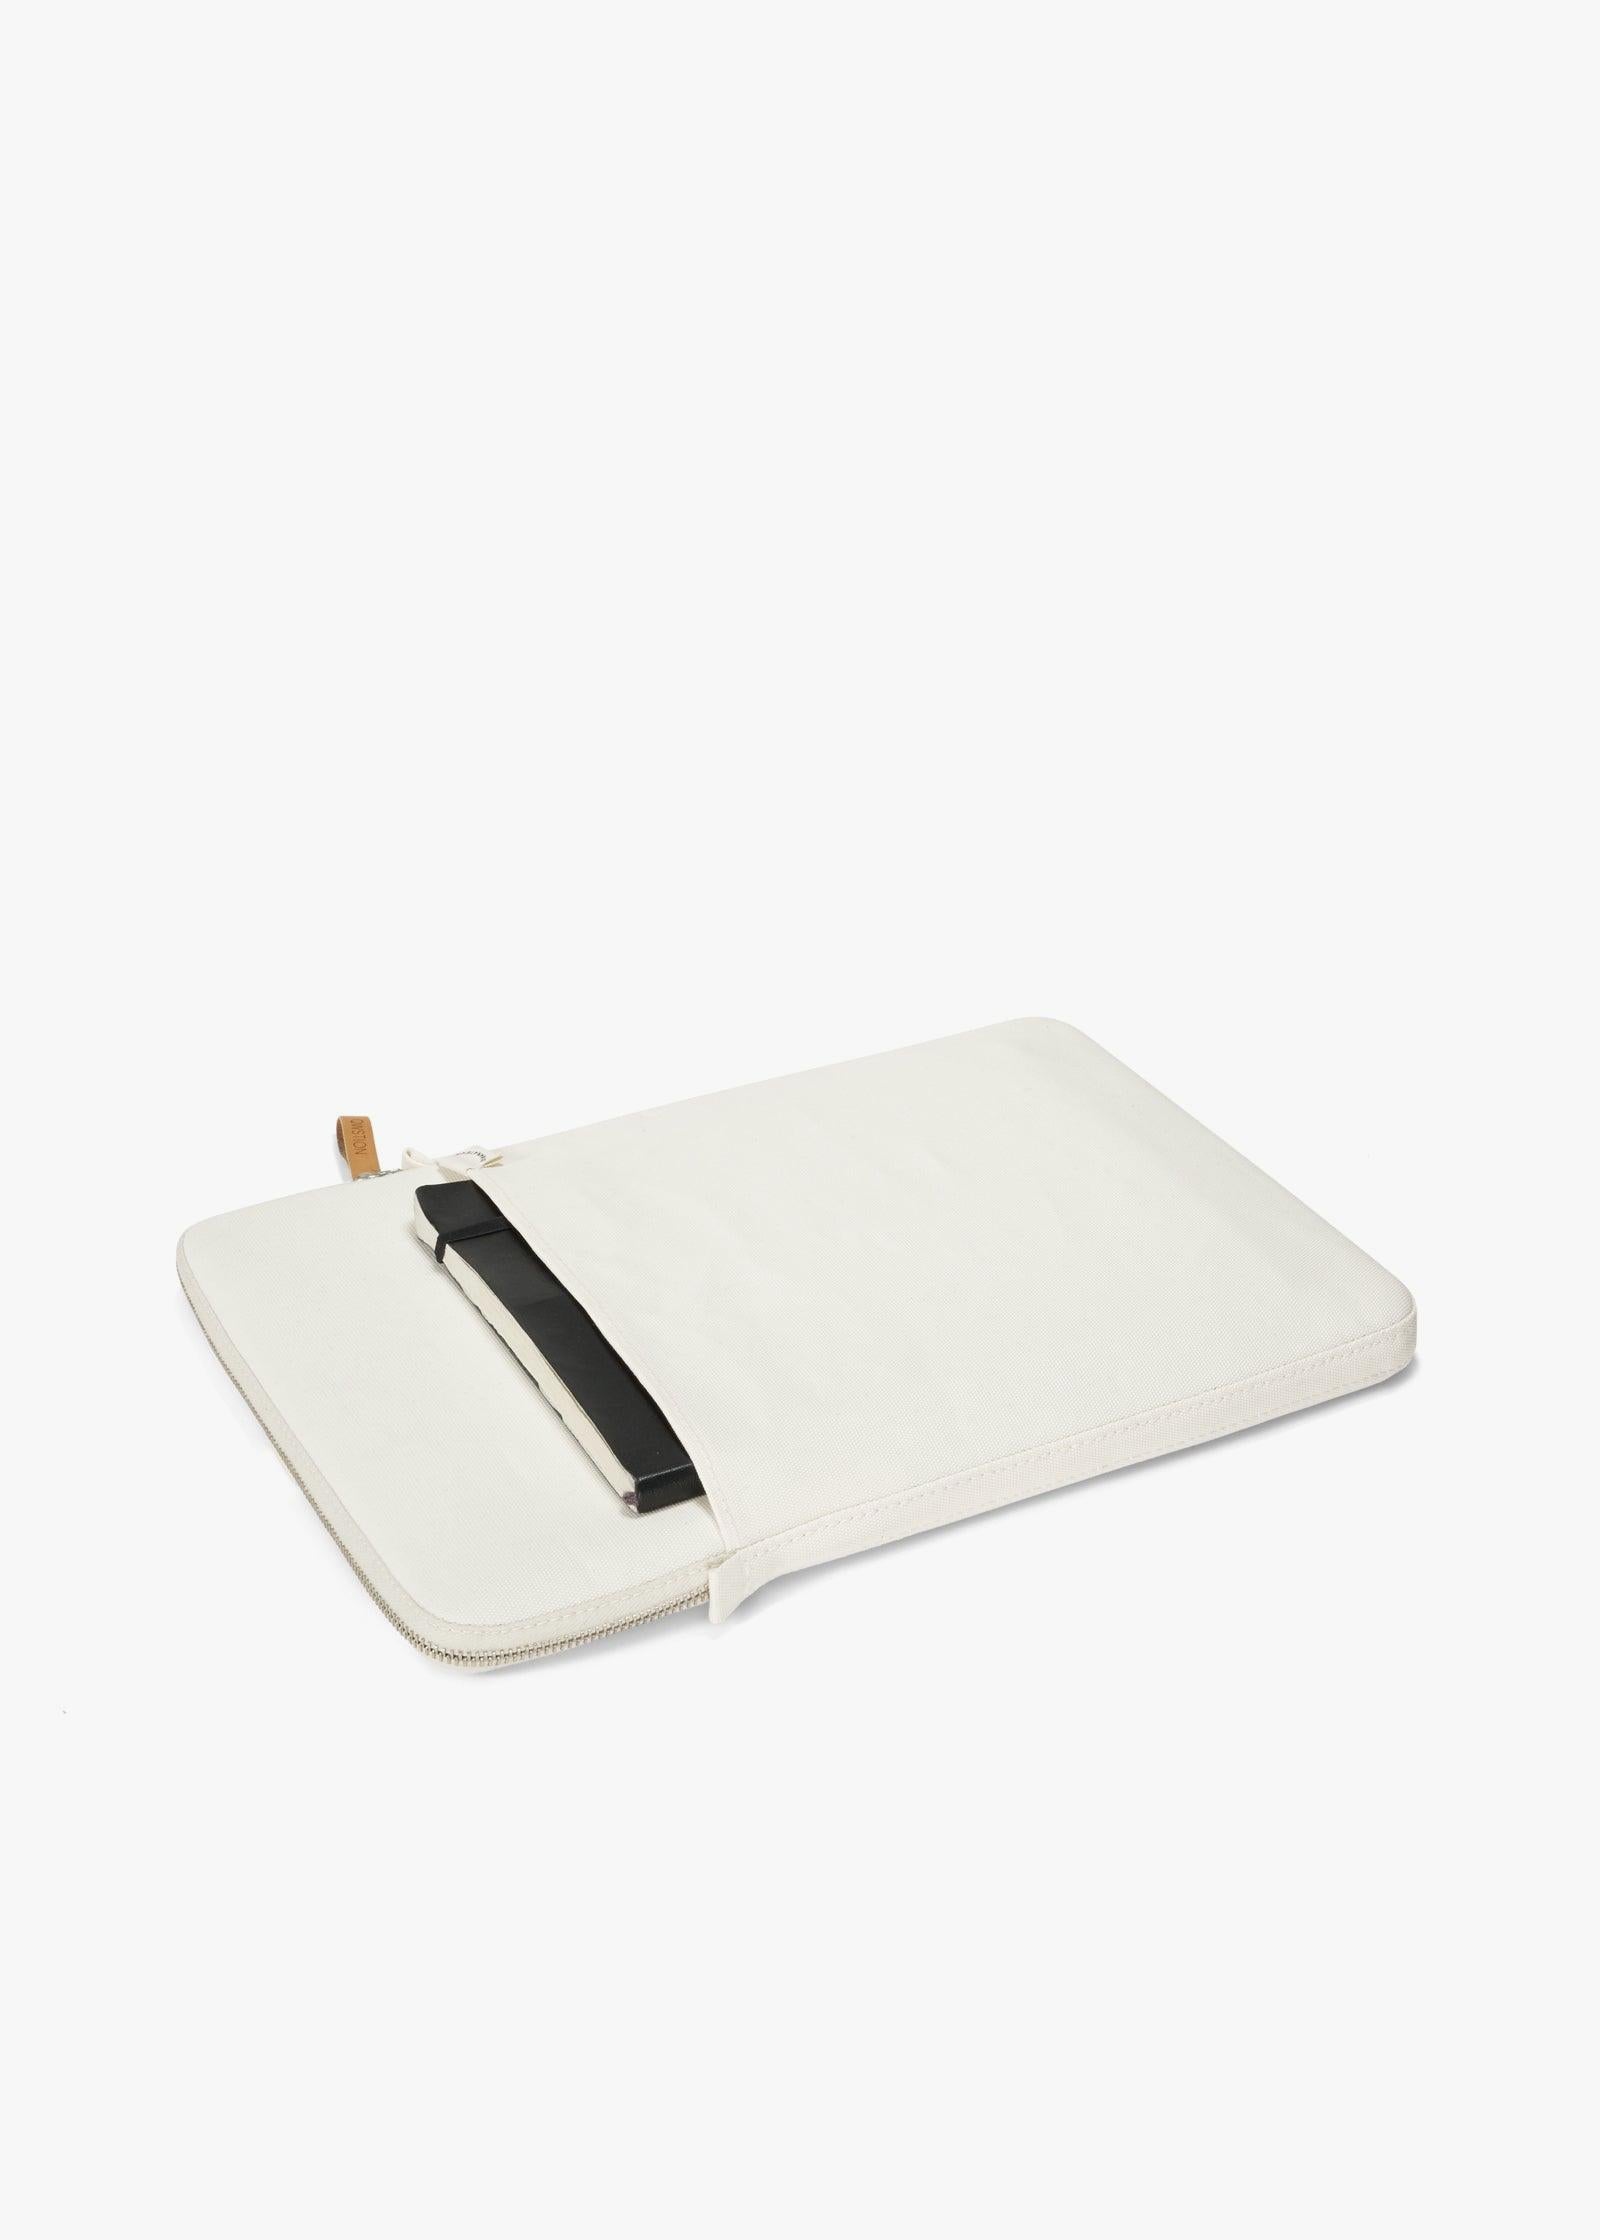 Bananatex Sleeve for Macbook 15" – Natural White - QWSTION